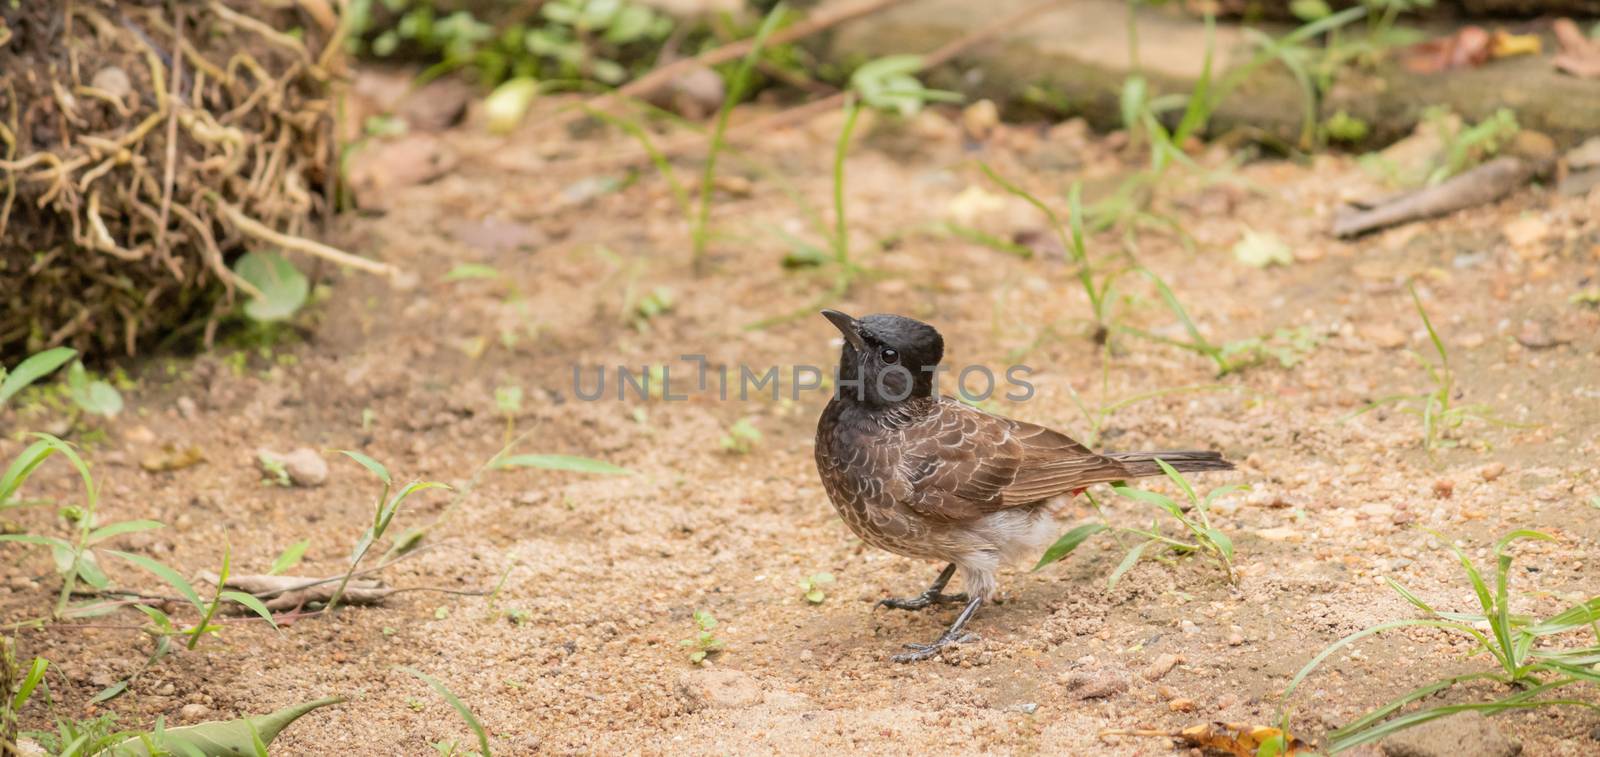 Red-vented bulbul bird on the ground searching insects for food while on full alert of the surroundings.